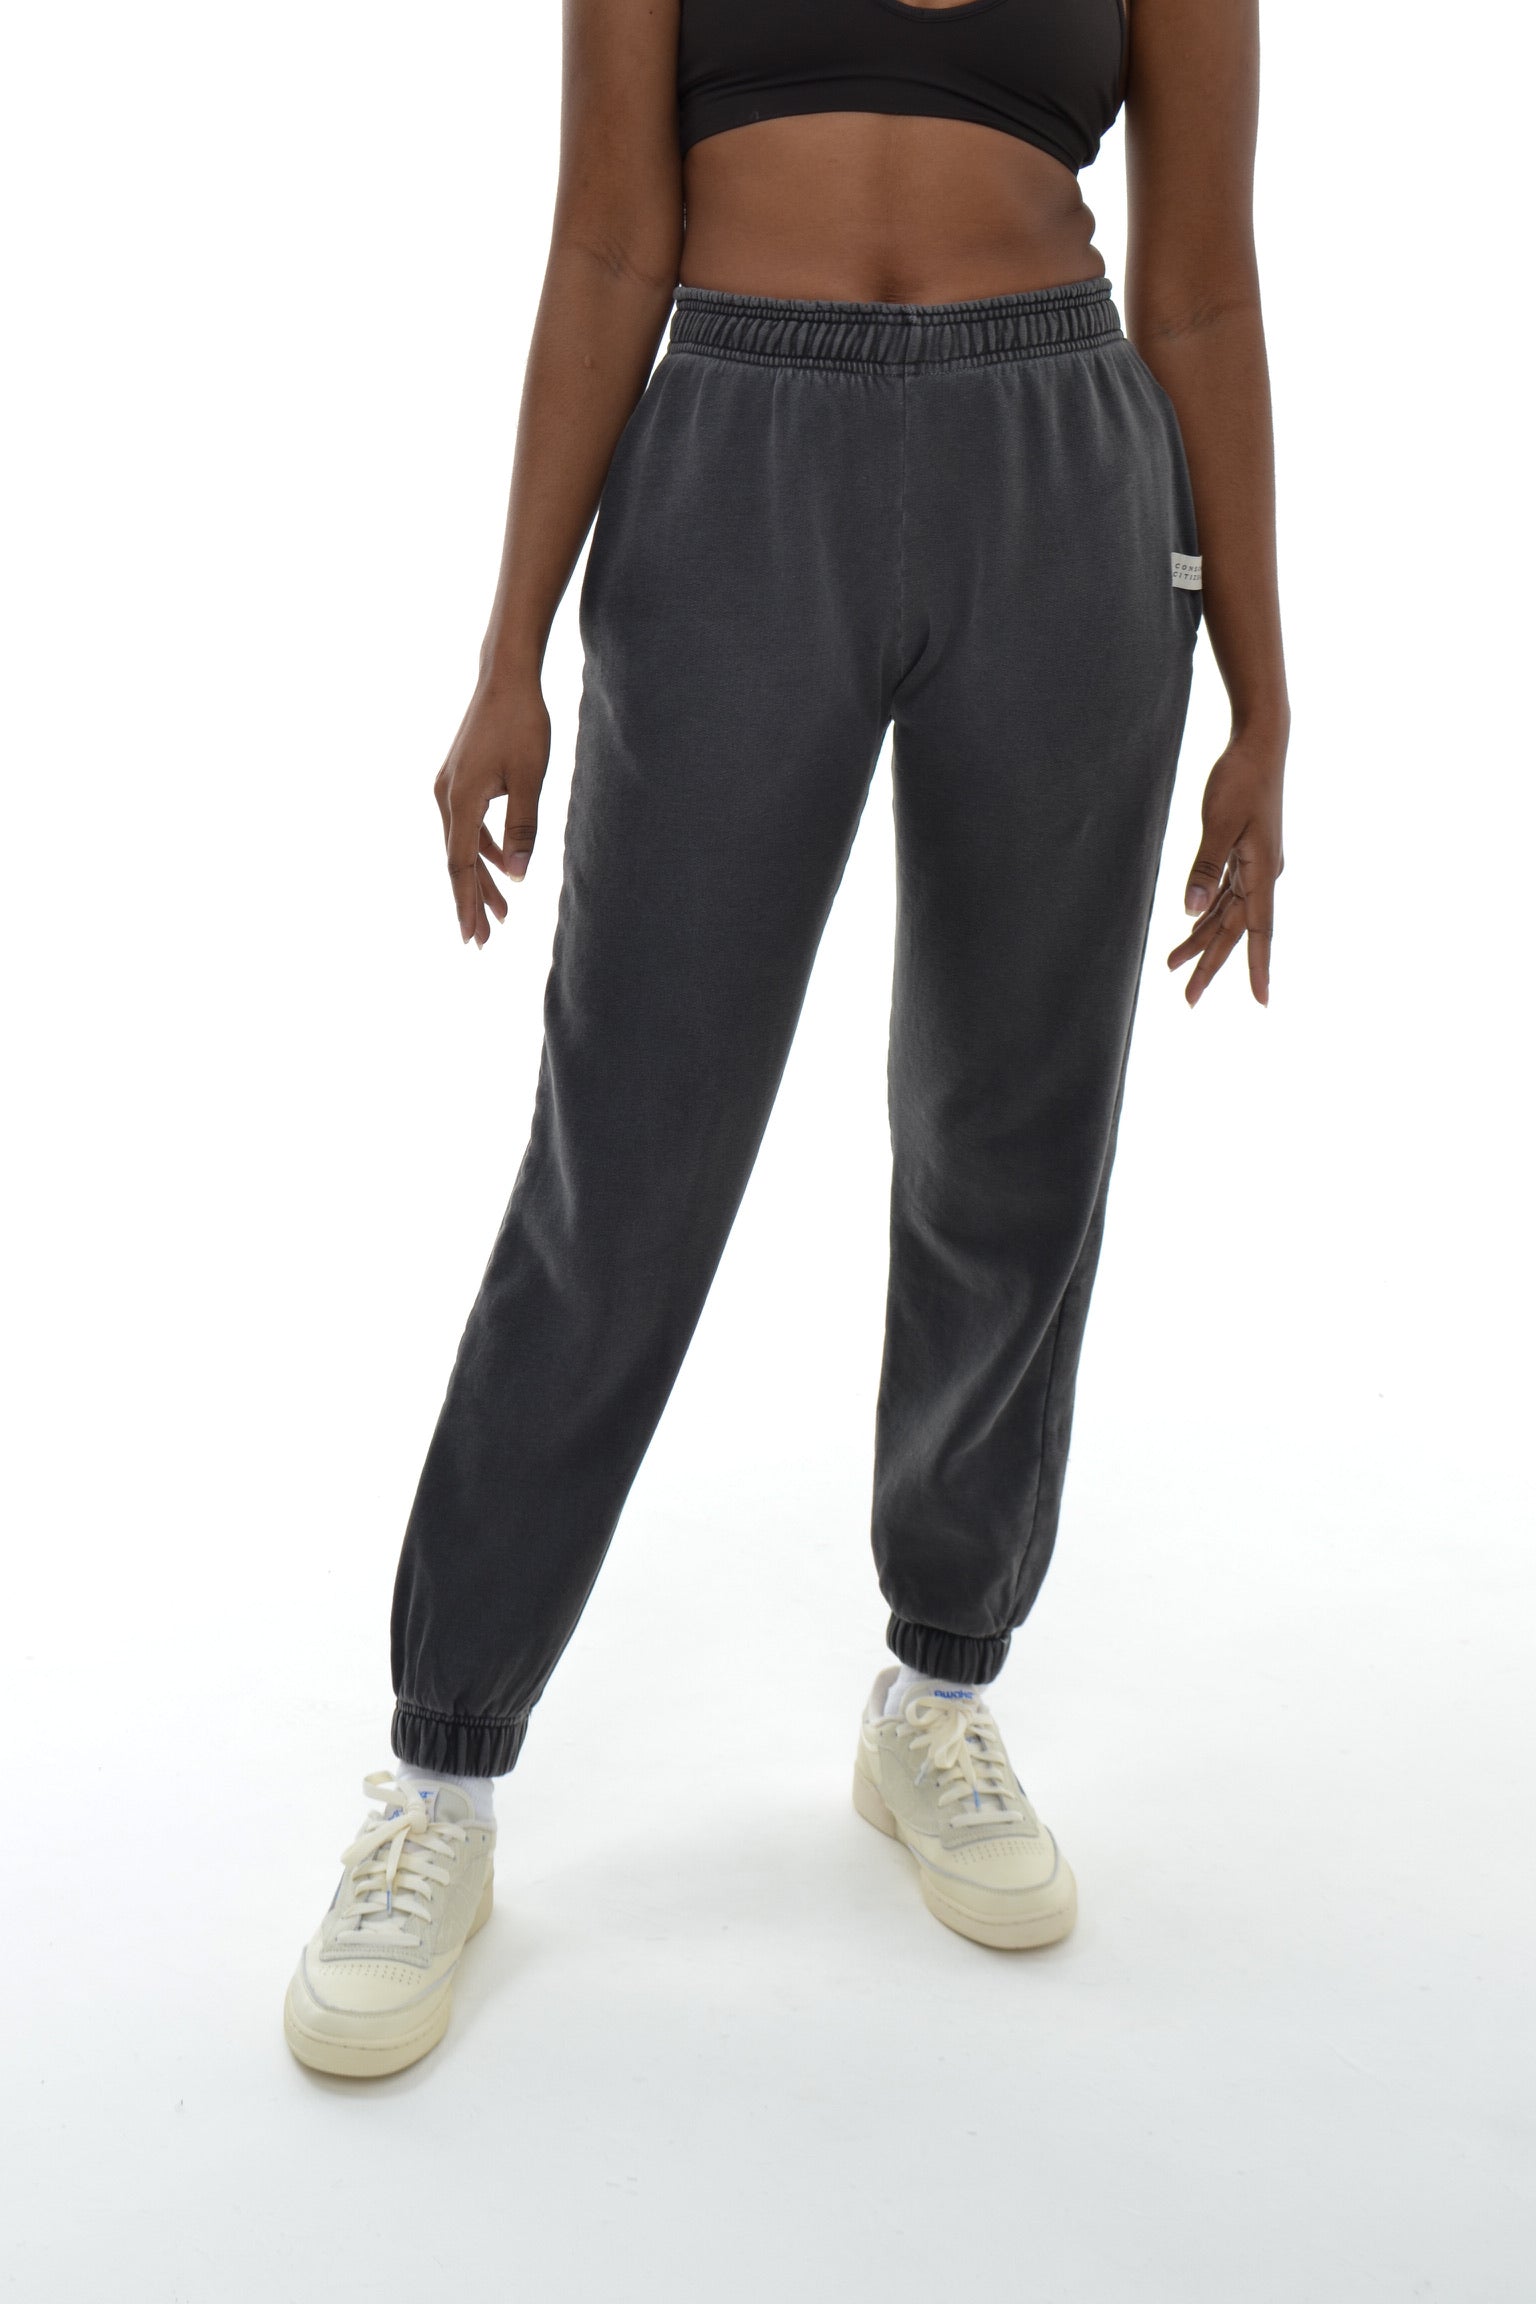  Unleash your inner athlete with sustainable joggers made from breathable and durable materials